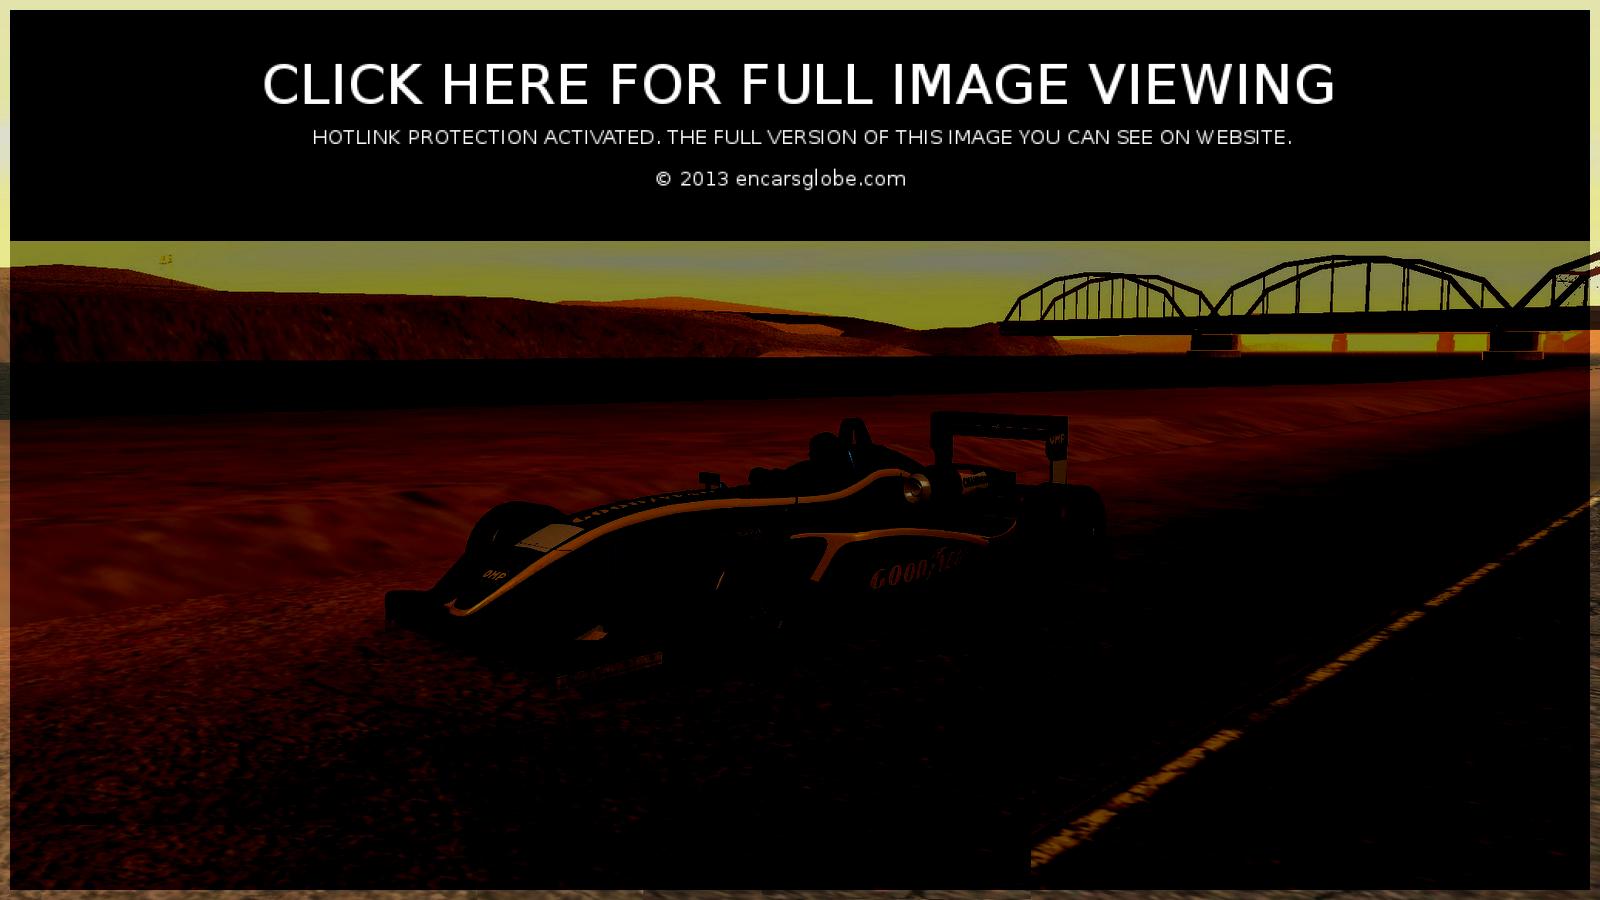 Dallara T08 Photo Gallery: Photo #09 out of 11, Image Size - 600 x ...